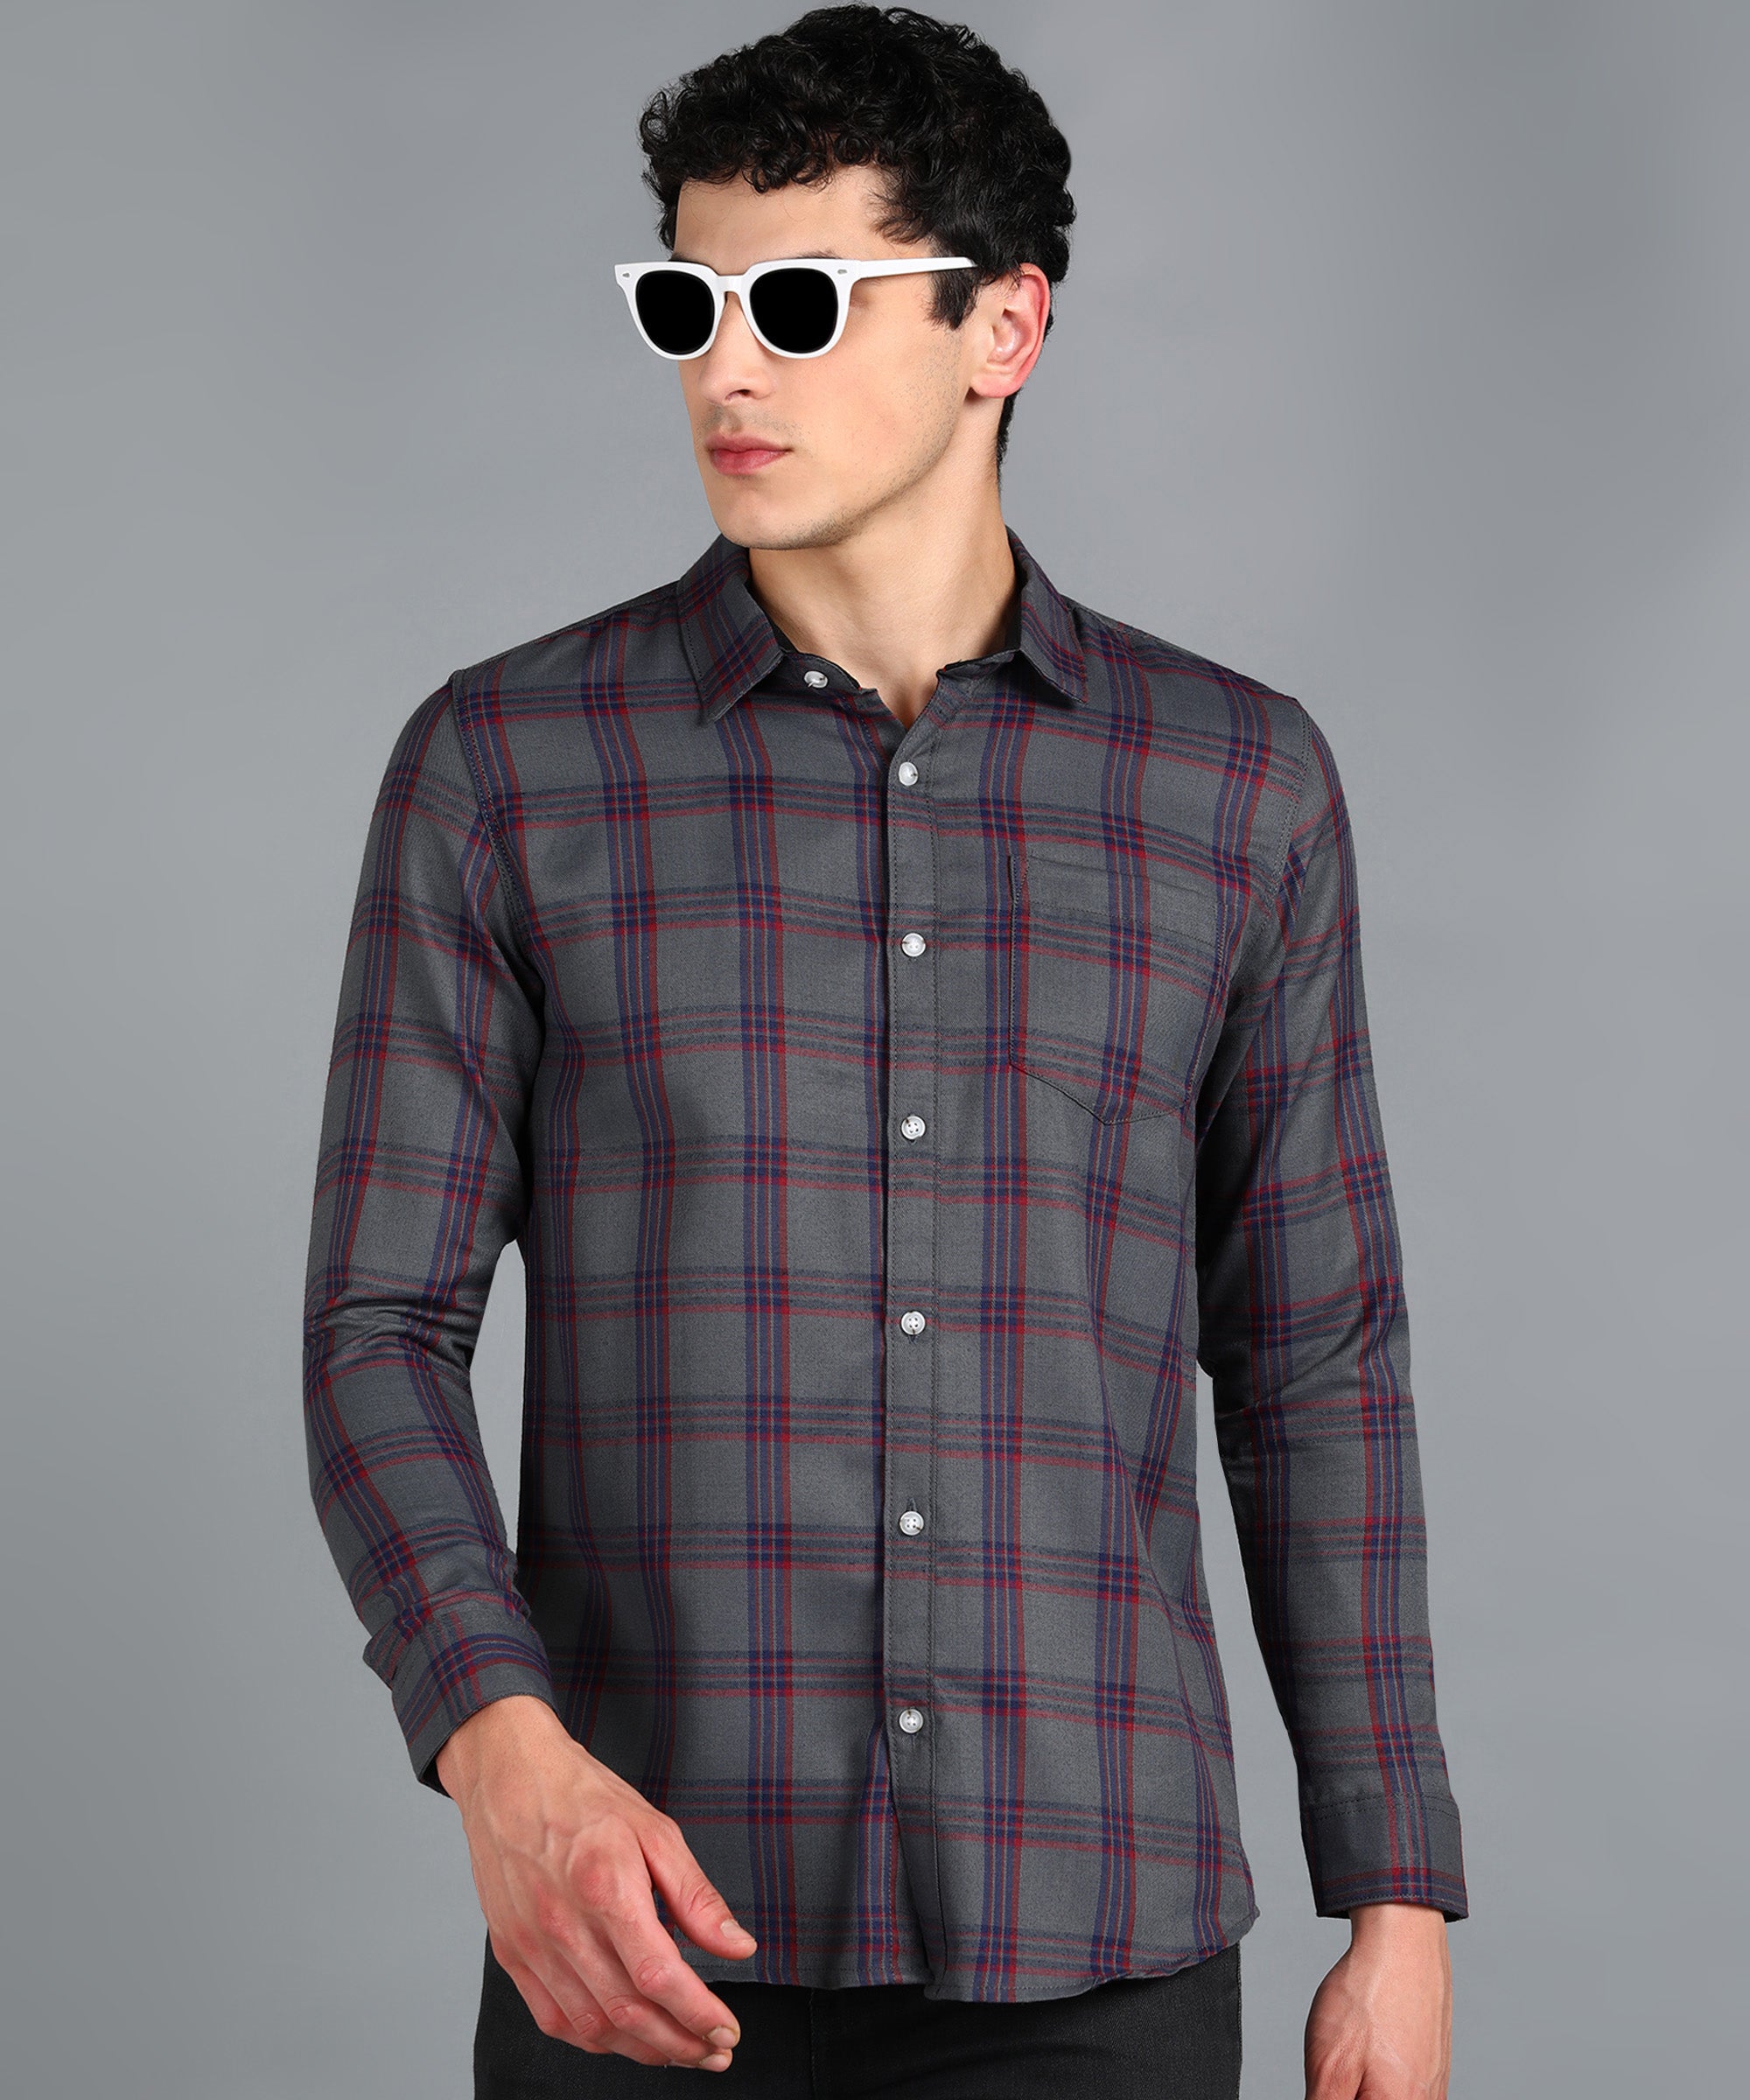 Men's Grey Cotton Full Sleeve Slim Fit Casual Checkered Shirt